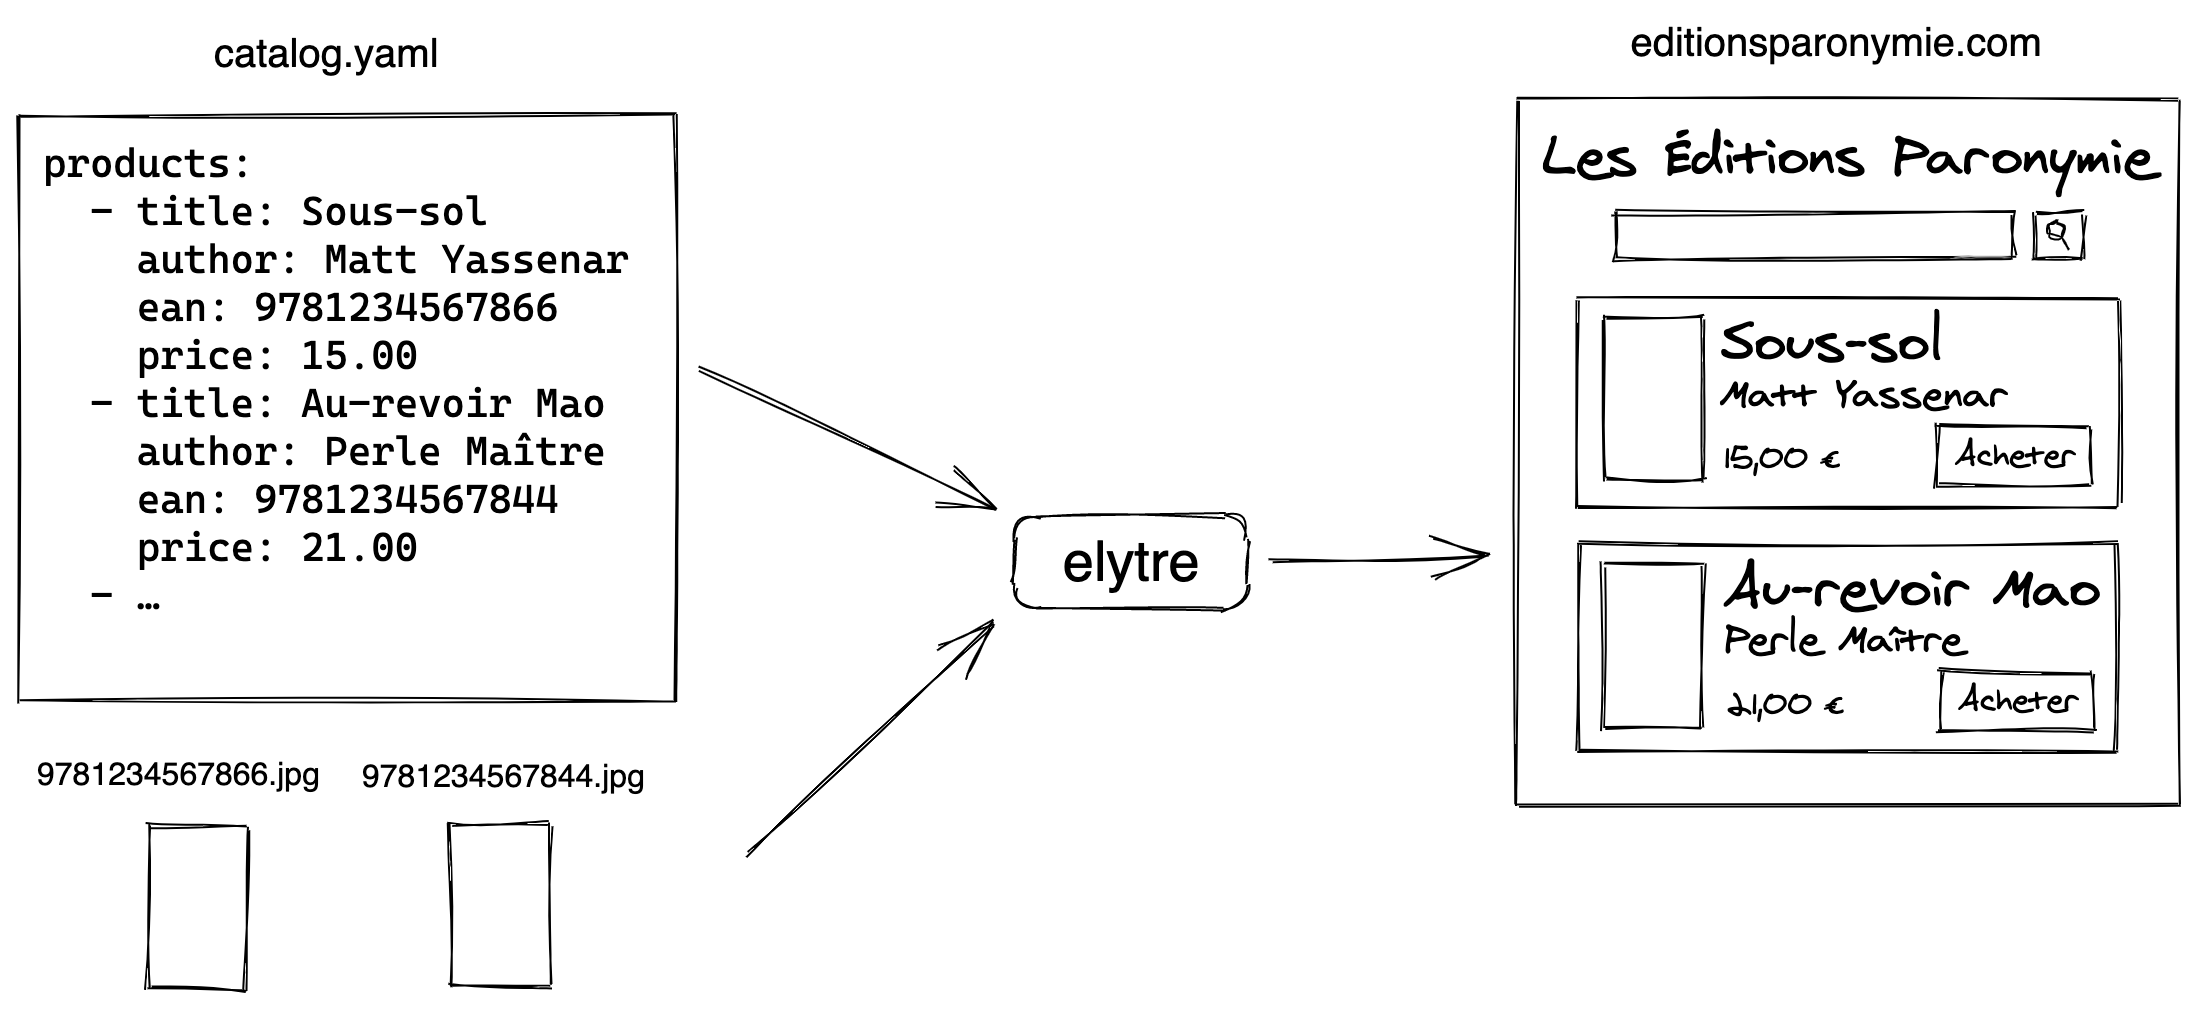 A schema explaining that elytre uses a catalog.yaml file to create a website